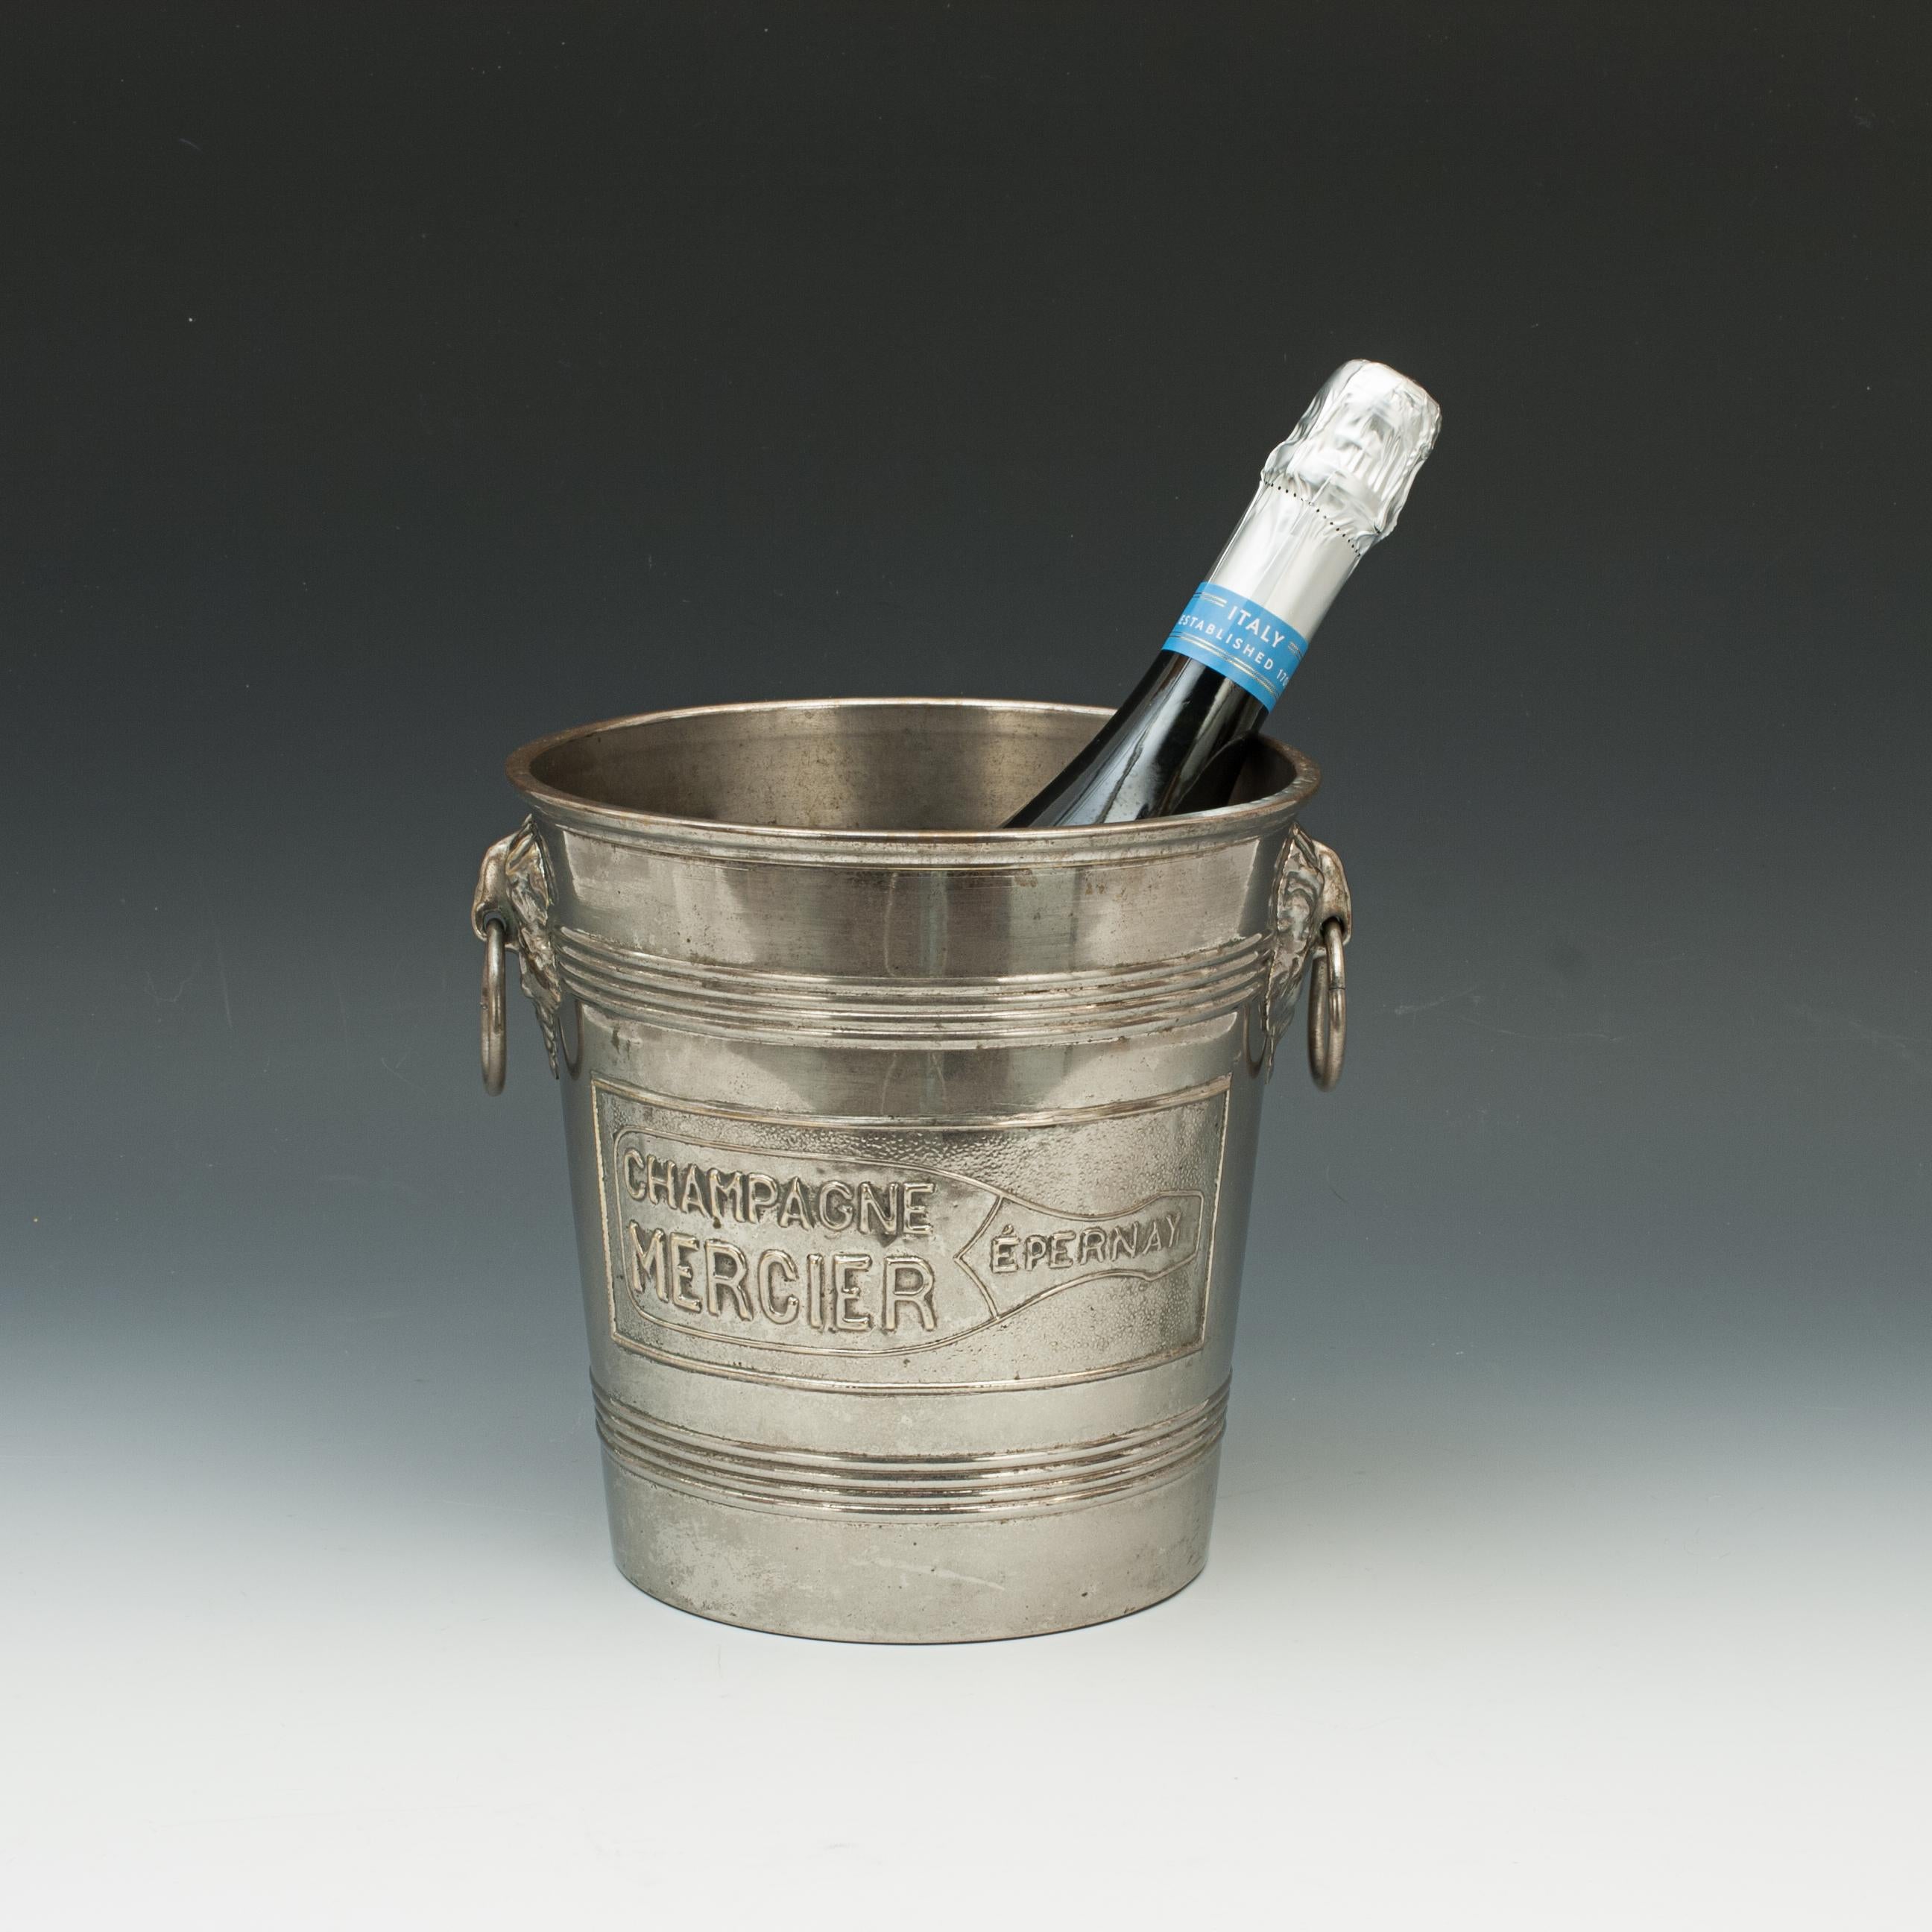 Vintage Champagne ice bucket.
A nice and well used good quality Mercier Champagne ice bucket. The metal bucket is plated and polished with drop ring handles. The front and back have applied embossed metal Champagne bottle reading 'CHAMPAGNE MERCIER